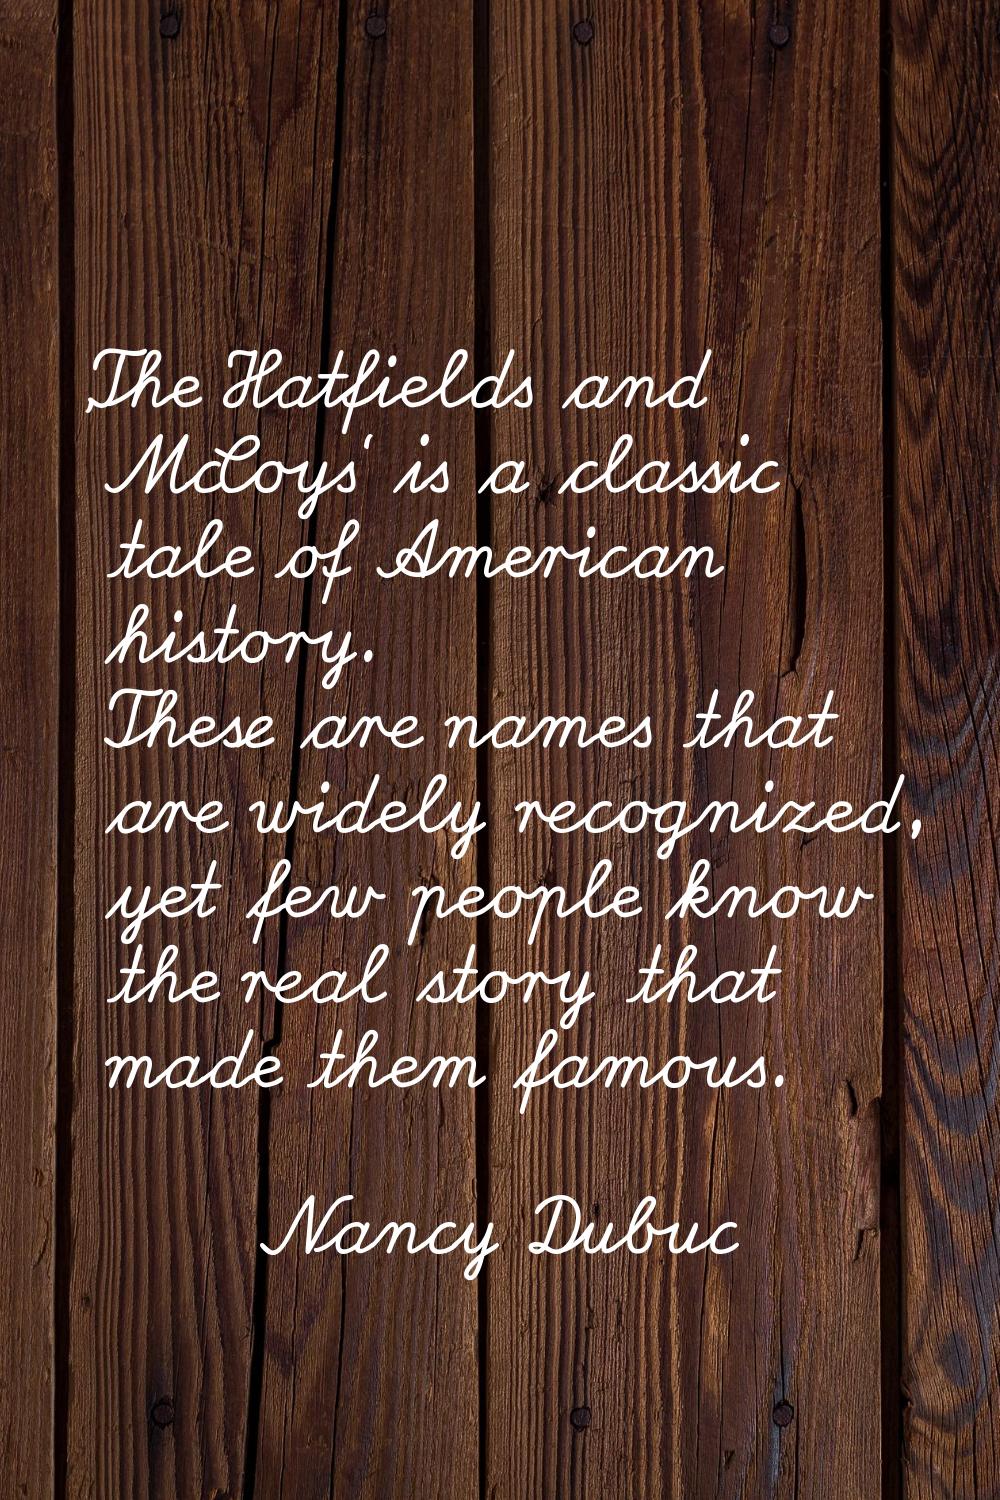 'The Hatfields and McCoys' is a classic tale of American history. These are names that are widely r